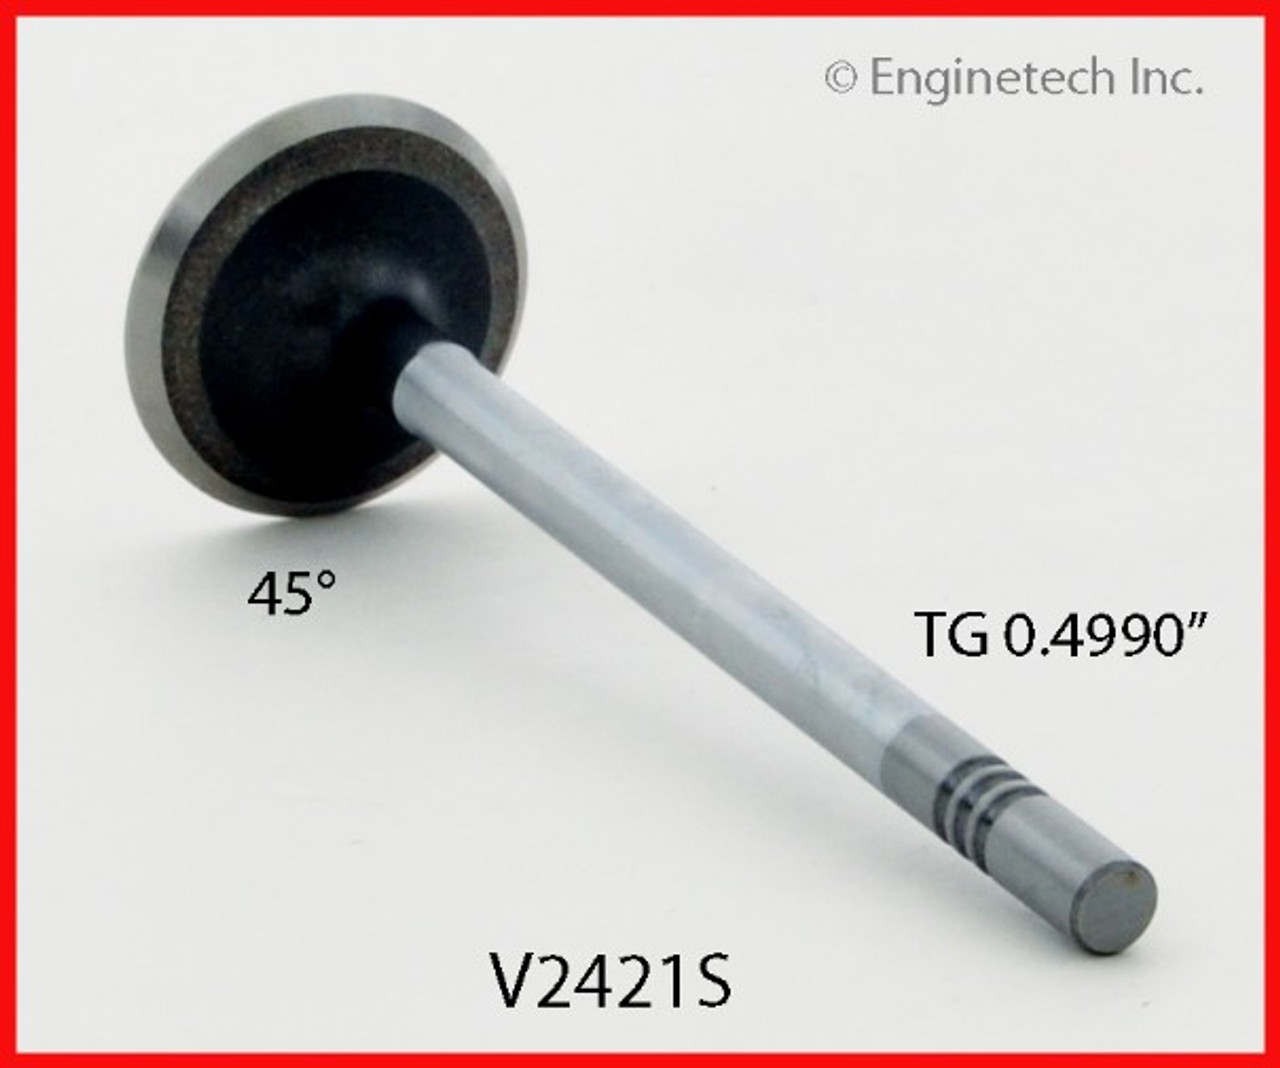 Exhaust Valve - 1997 Ford Crown Victoria 4.6L (V2421S.A9)